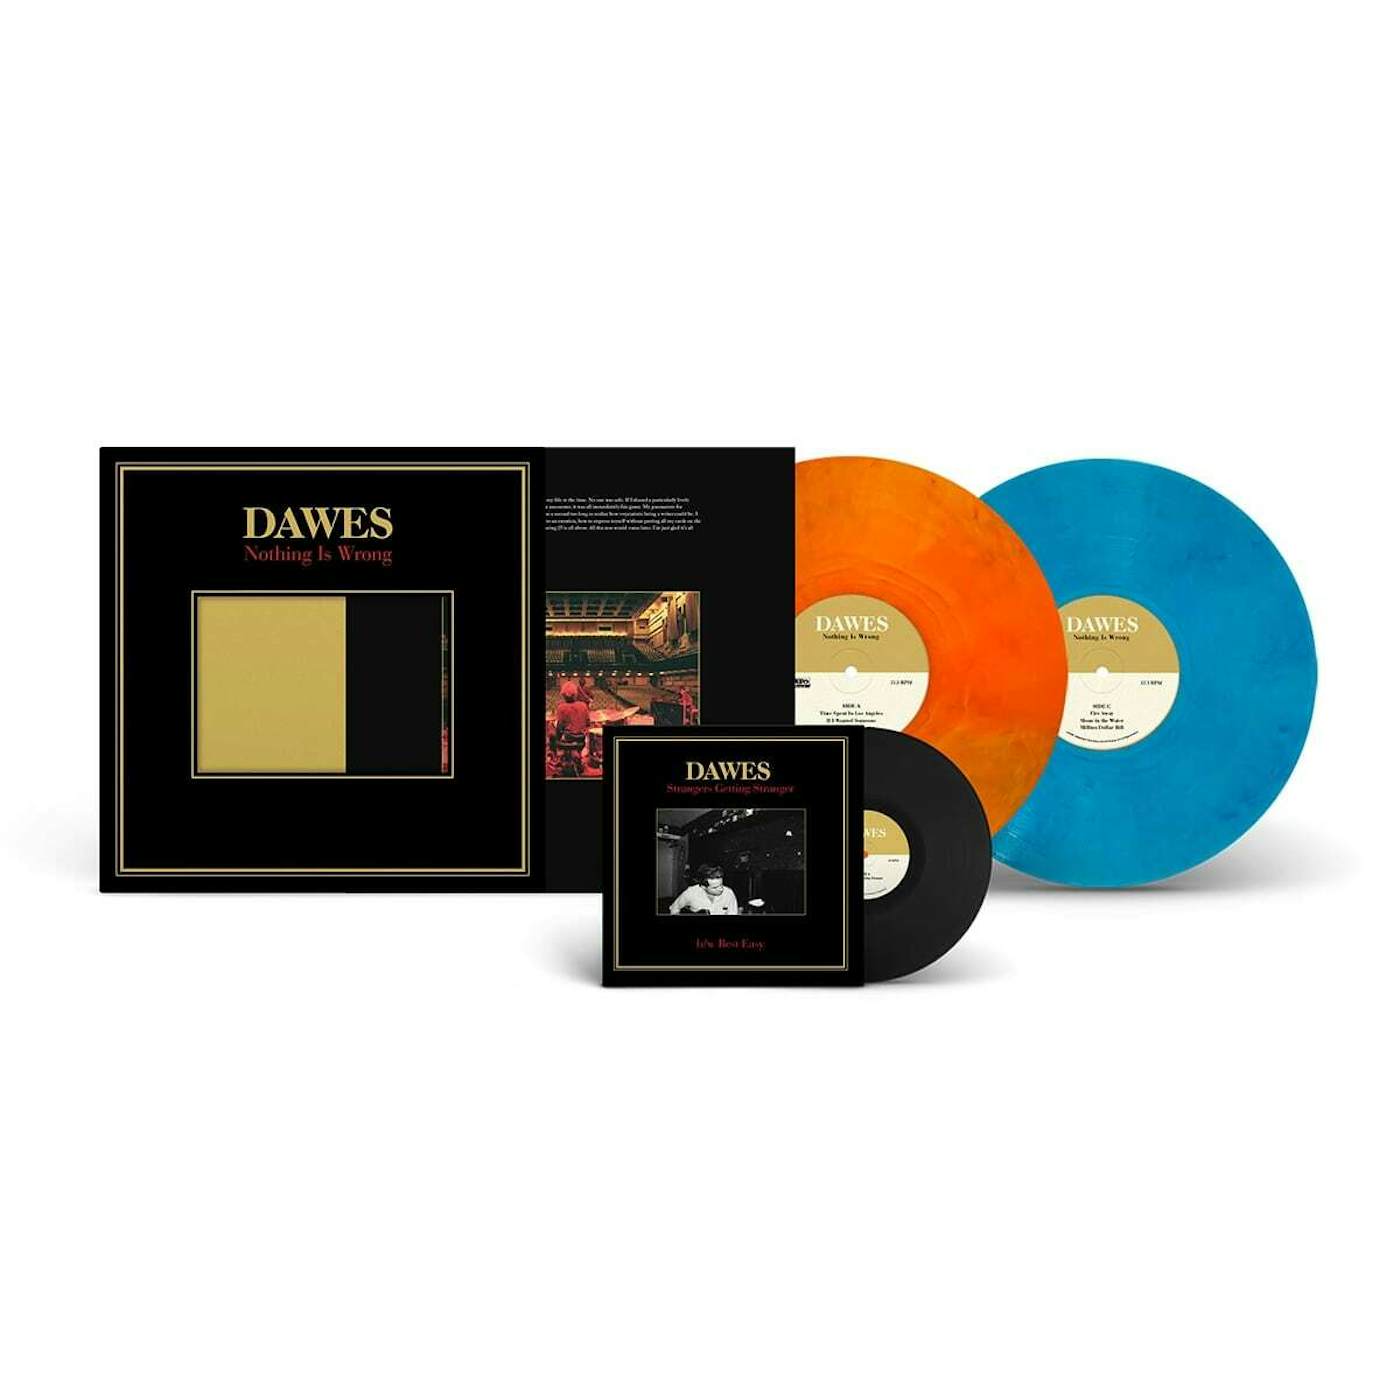 Dawes – “Nothing Is Wrong (10th Anniversary Deluxe Edition)” [ATO Exclusive] 2 x Colored LP’s + 7” (Vinyl)